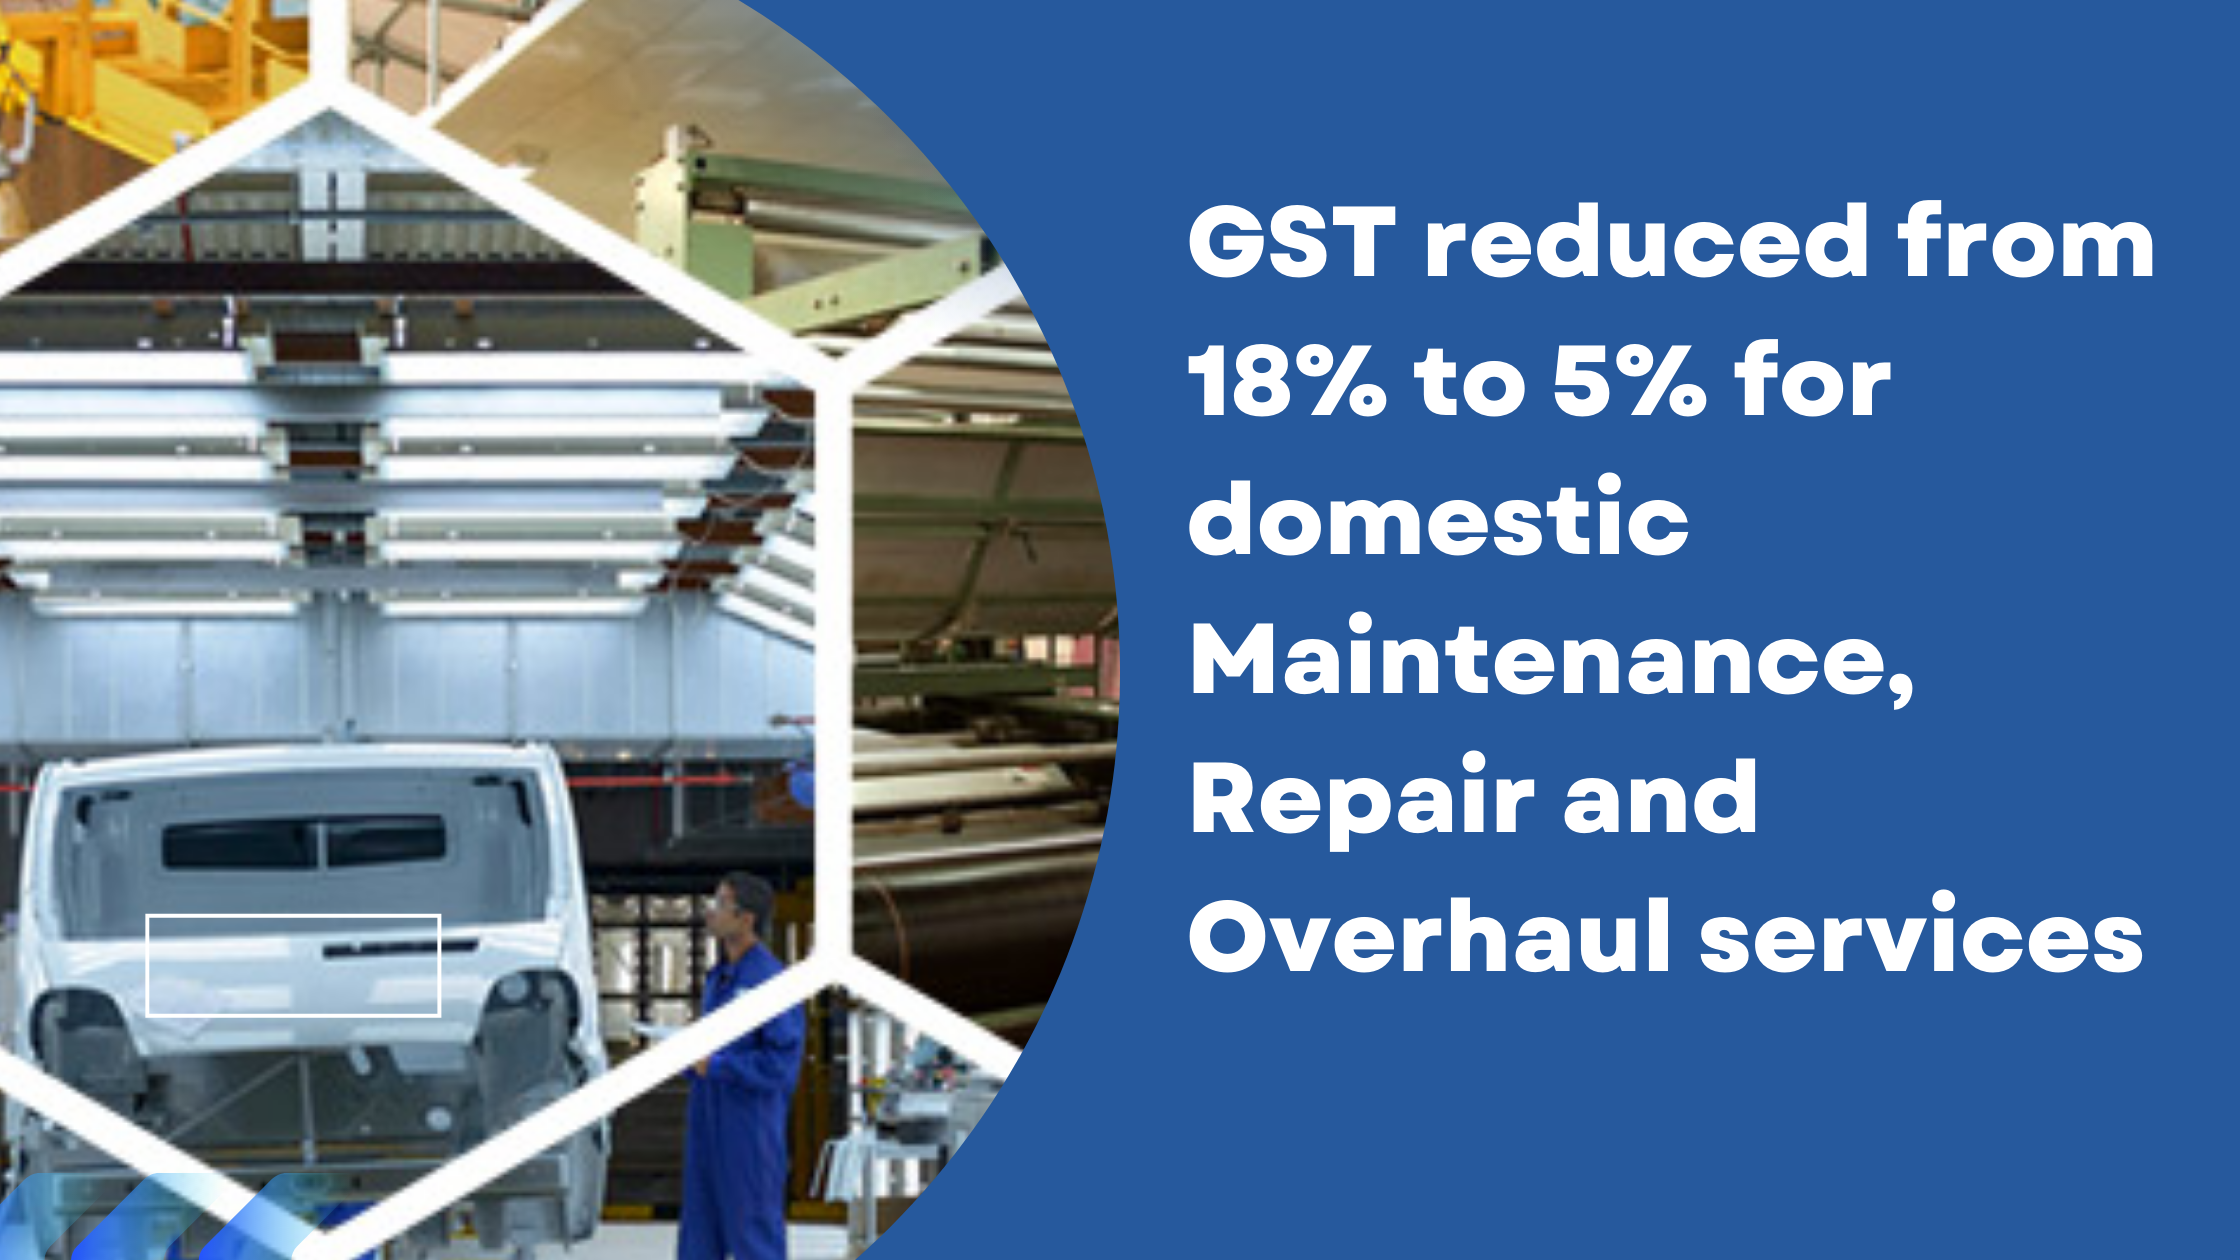 GST reduced from 18% to 5% for domestic Maintenance, Repair and Overhaul (MRO) services